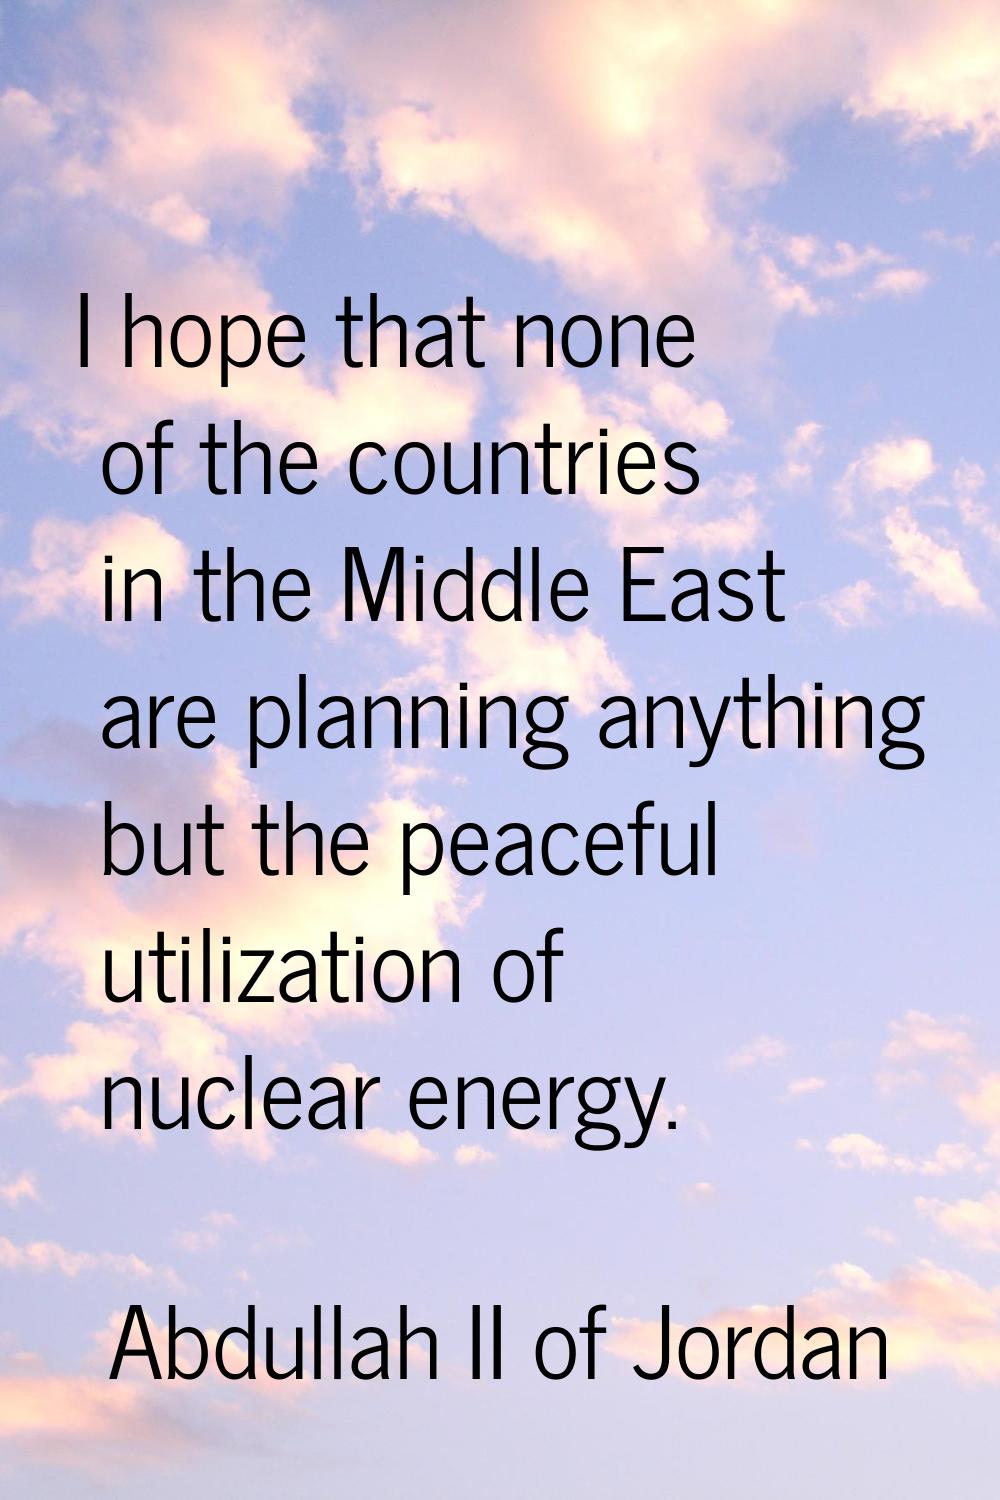 I hope that none of the countries in the Middle East are planning anything but the peaceful utiliza